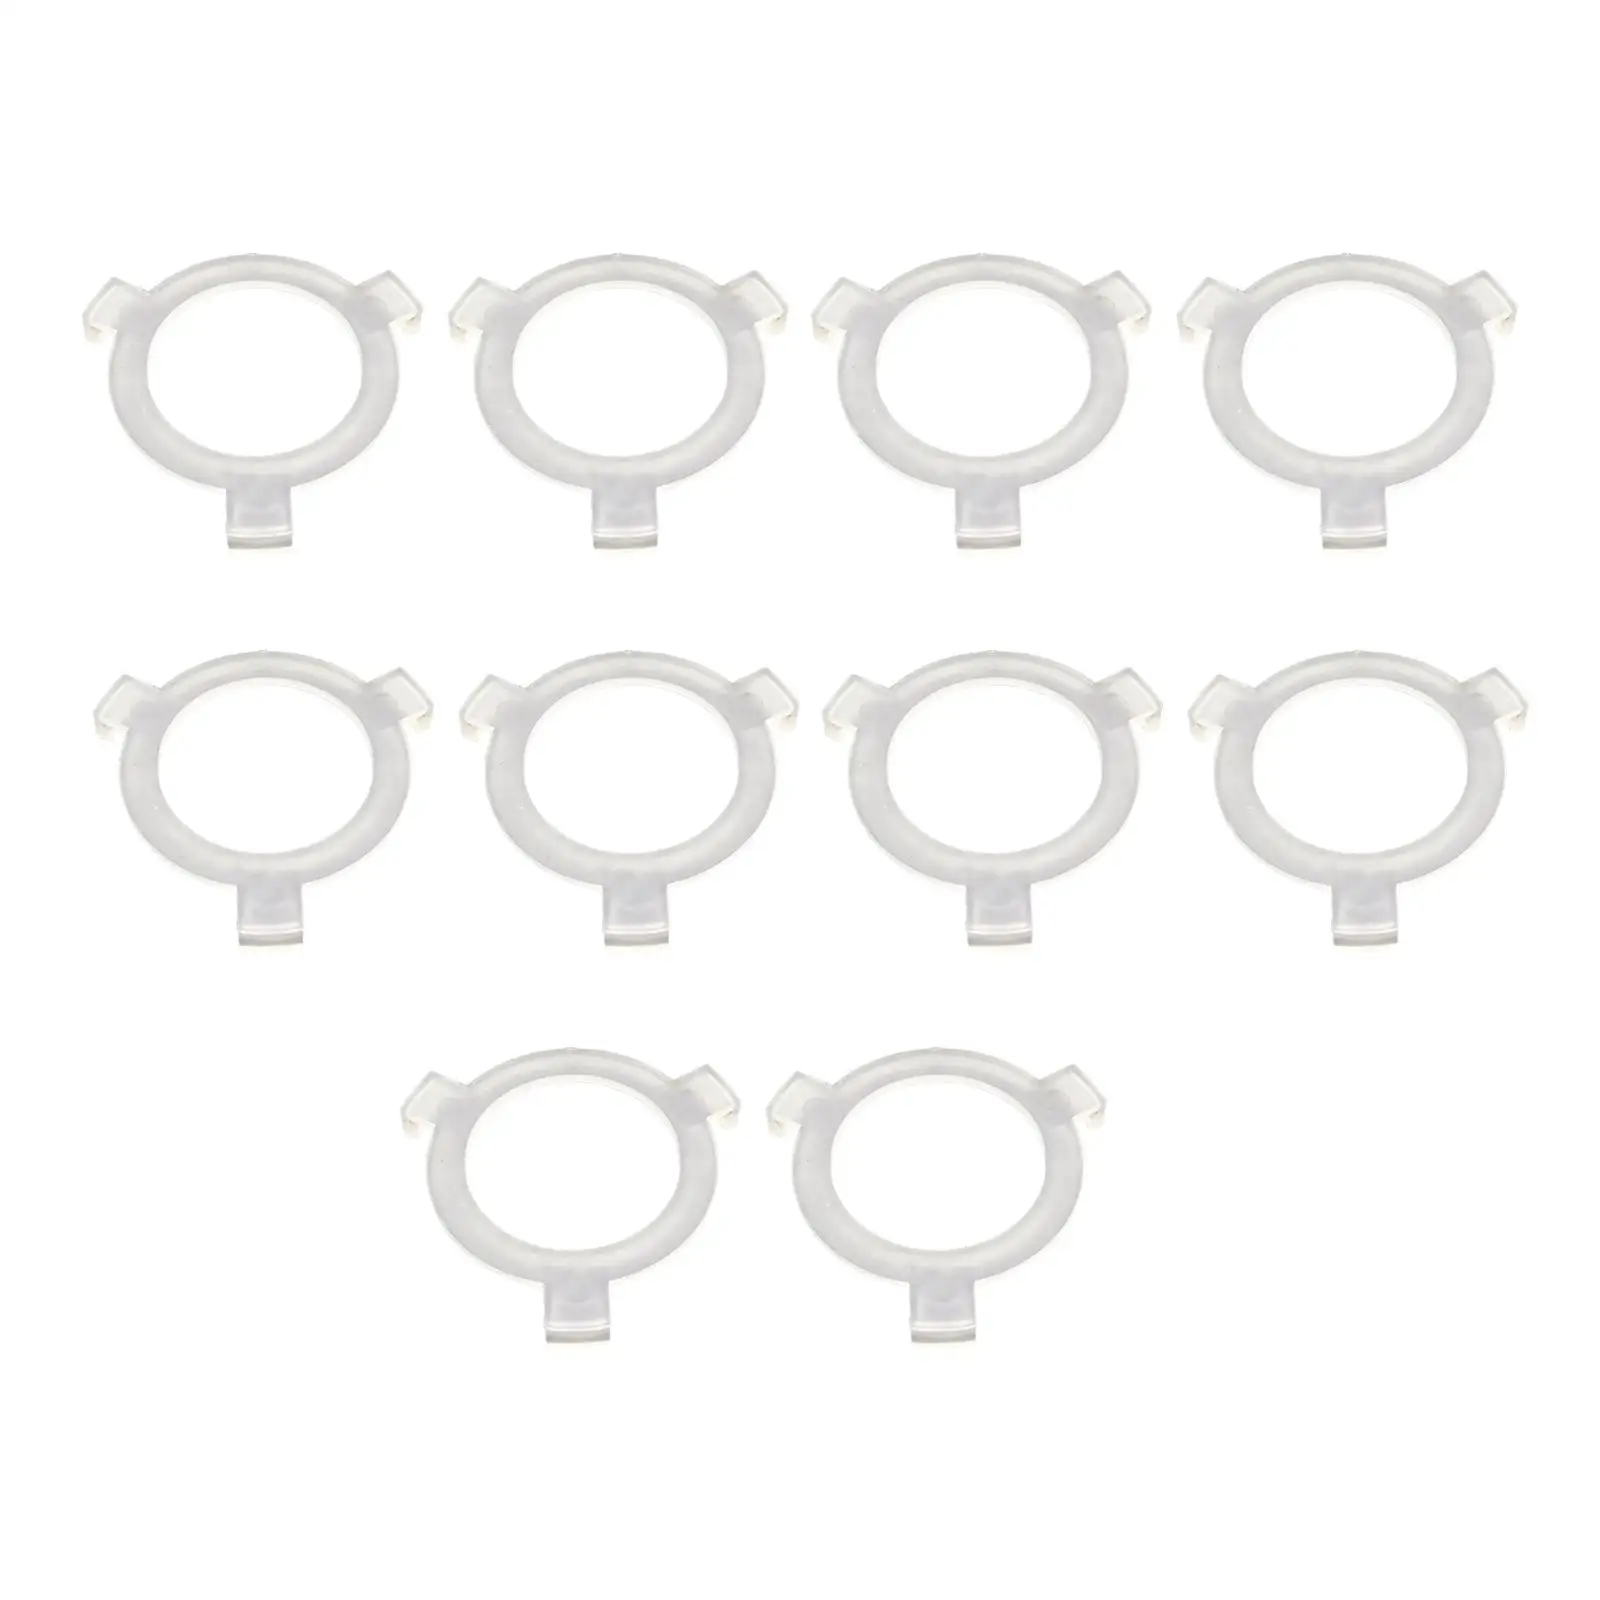 10pcs E27 To E26 Lampshade Reducing Rings Adapter Converters Lamp Socket Holder Light Accessories